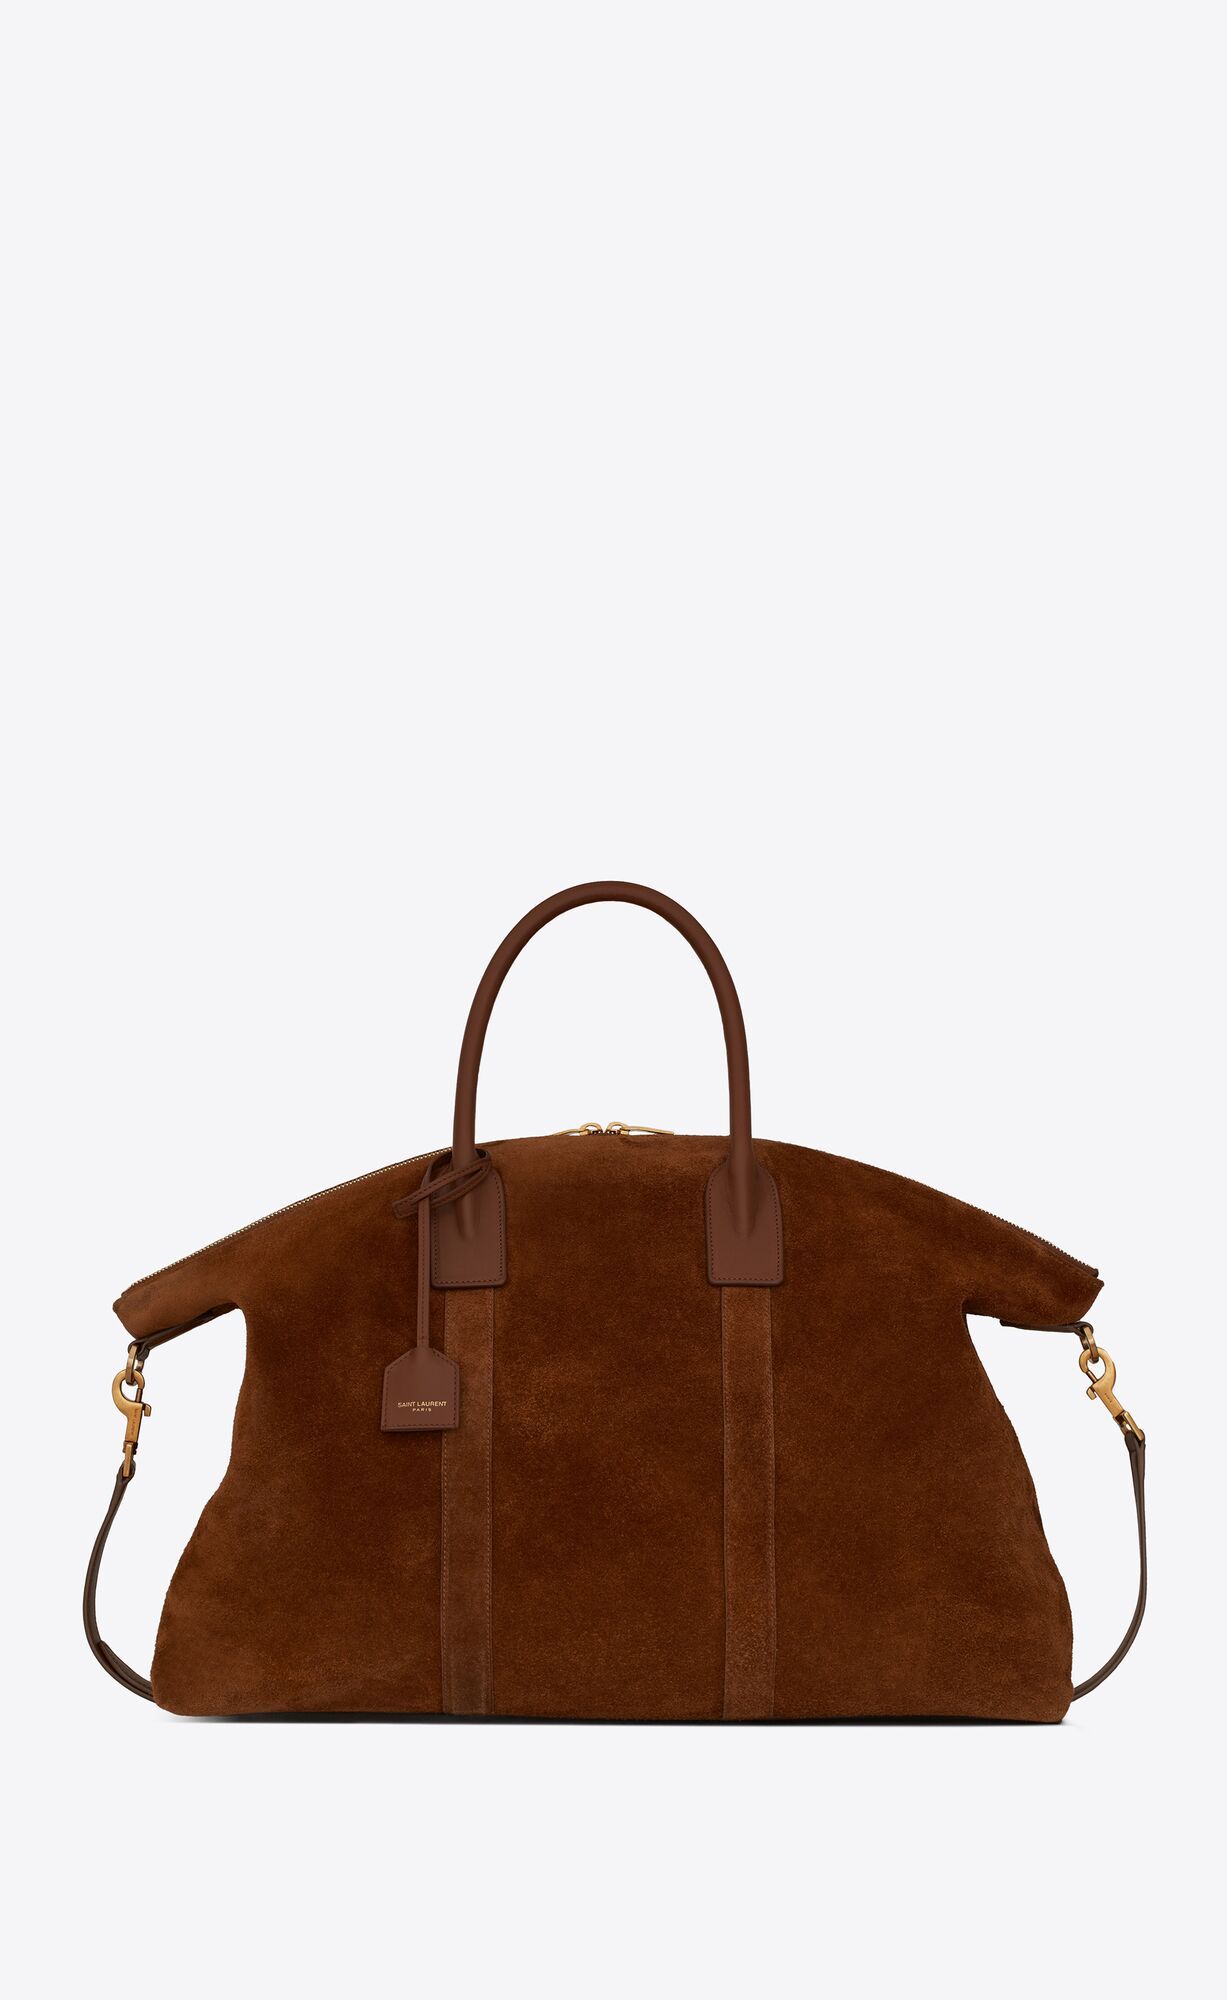 <p><strong>$2490.00</strong></p><p><a href="https://www.ysl.com/en-us/giant-bowling-bag-in-suede-810016297.html">Shop Now</a></p><p>A durable bowling bag crafted from supple suede is an iconic way to travel in style. </p><p><strong>Dimensions: </strong>18.5" x 13.4" x 7.5"</p><p><strong>Materials: </strong>Calfskin leather with grosgrain lining and metal hardware</p>